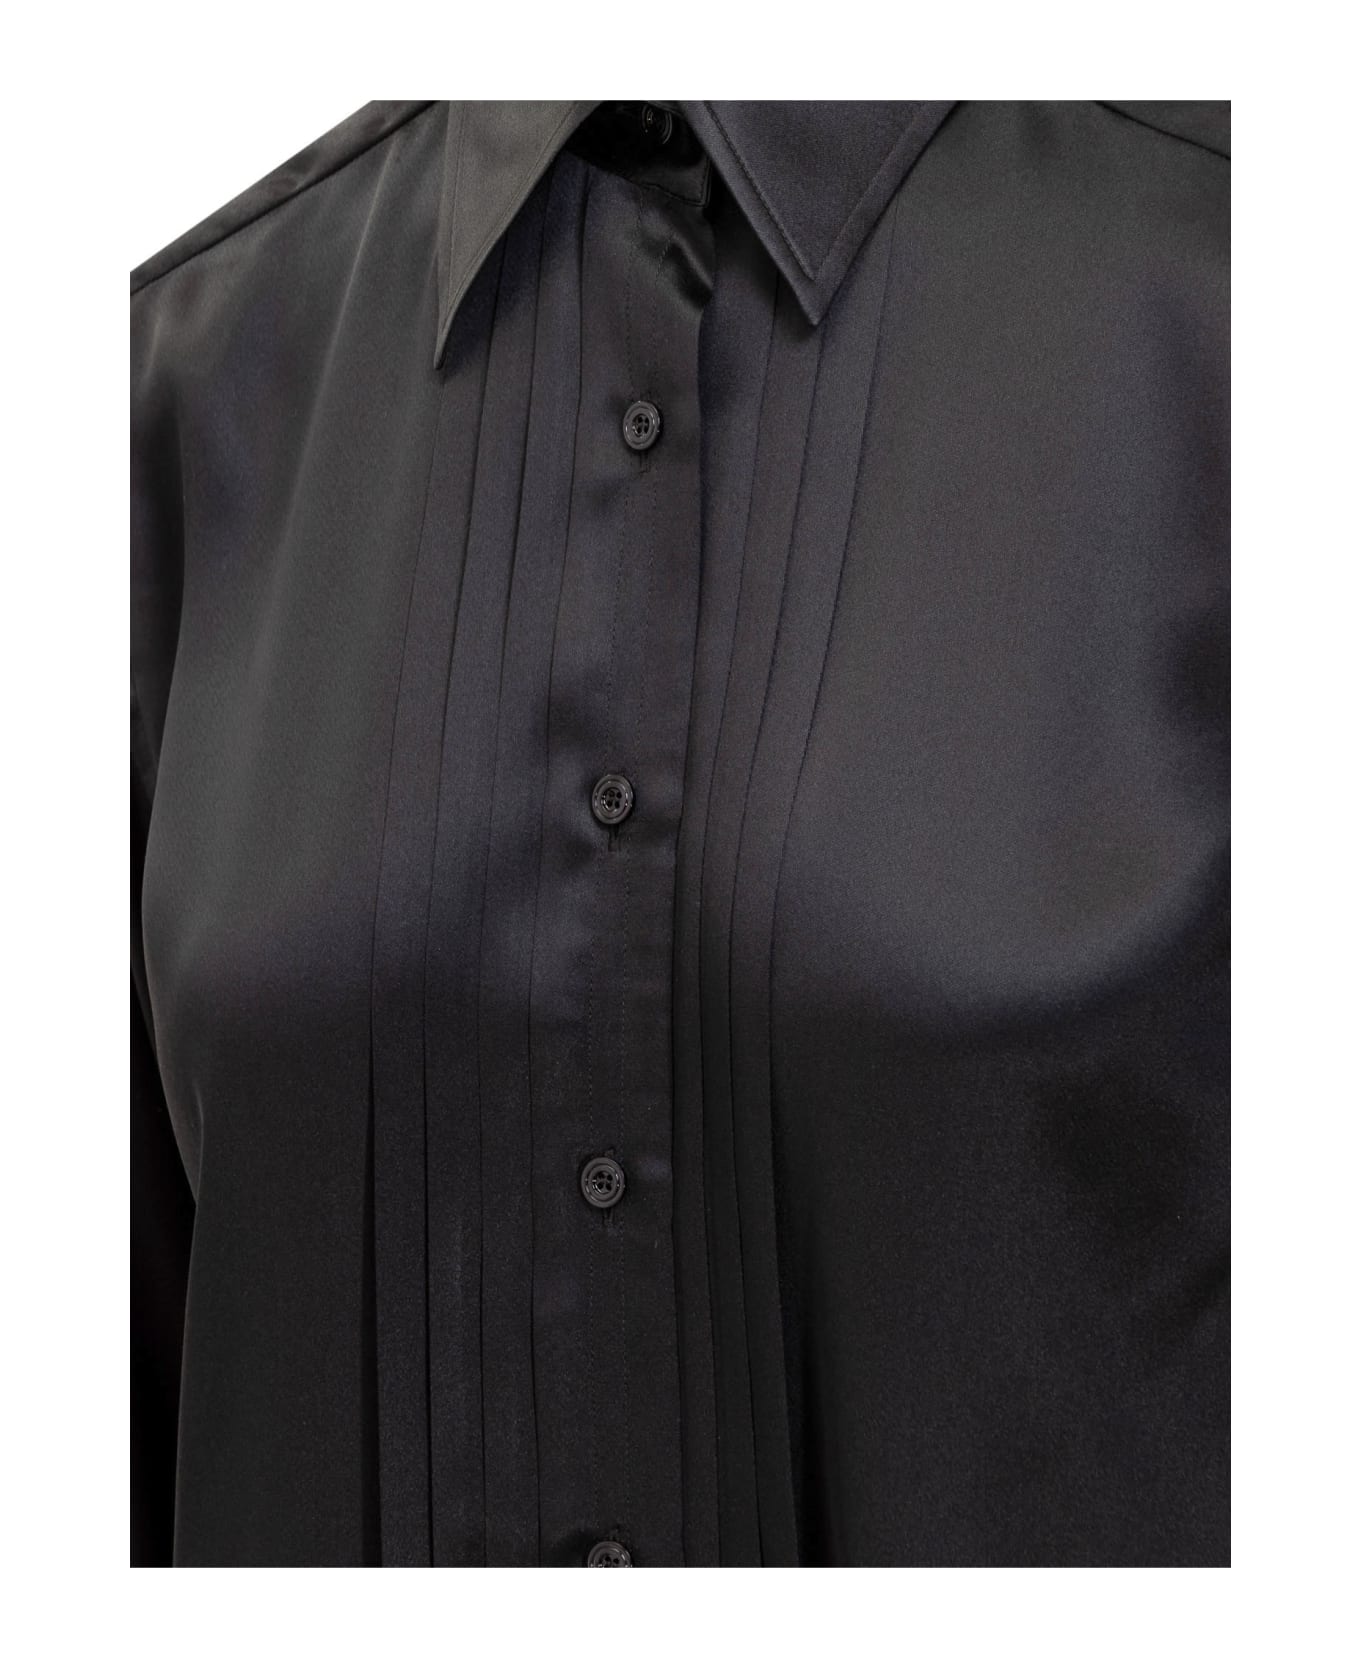 Tom Ford Silk Shirt With Pleated Detail - BLACK シャツ